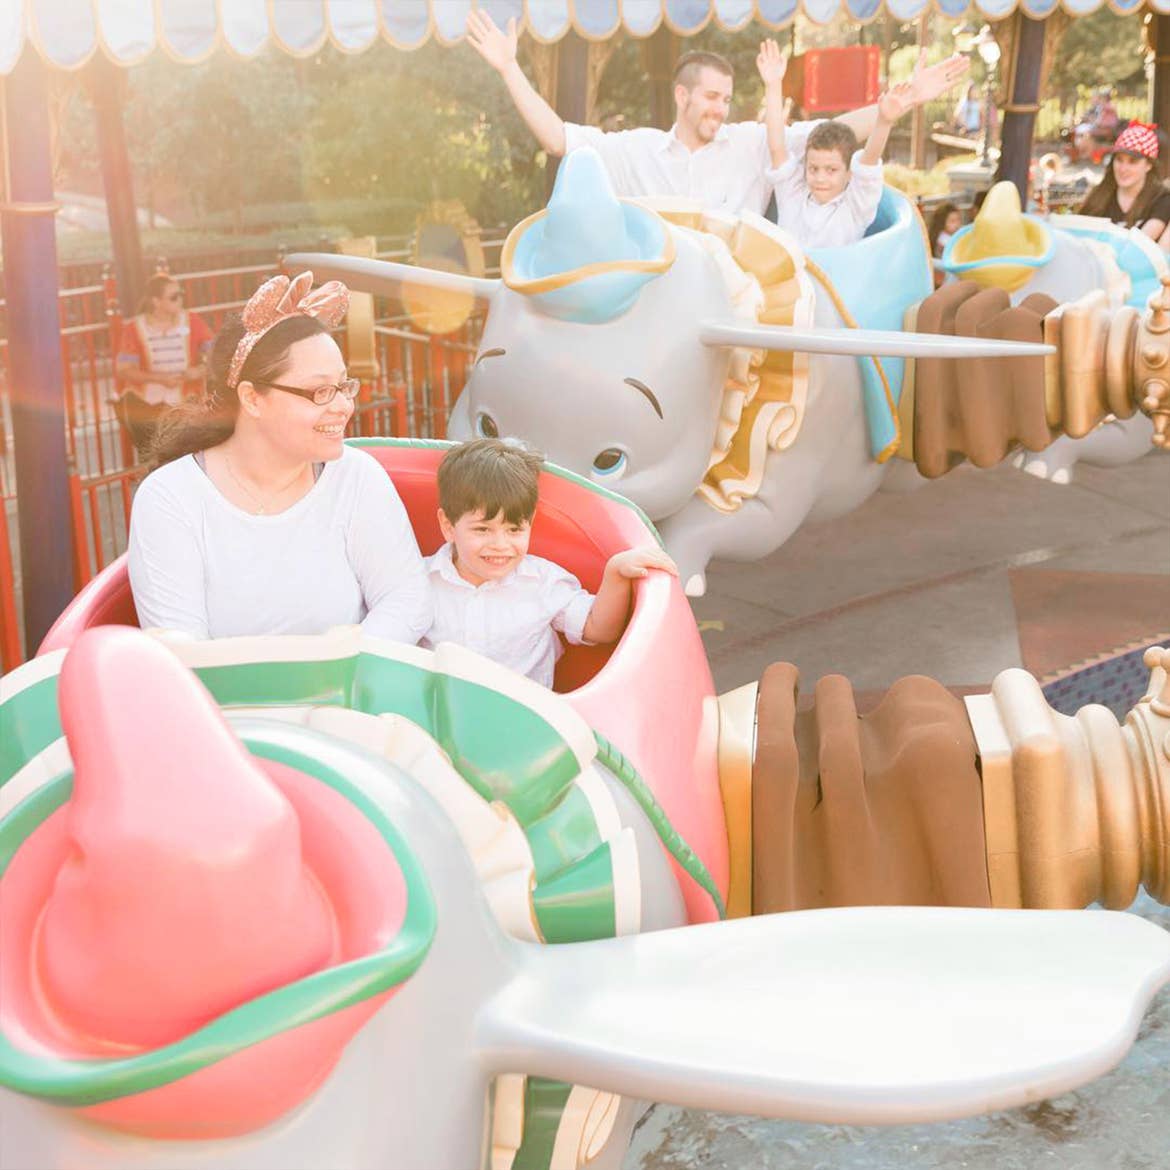 A woman, man and two young boys wear white shirts while riding a flying elephant ride.